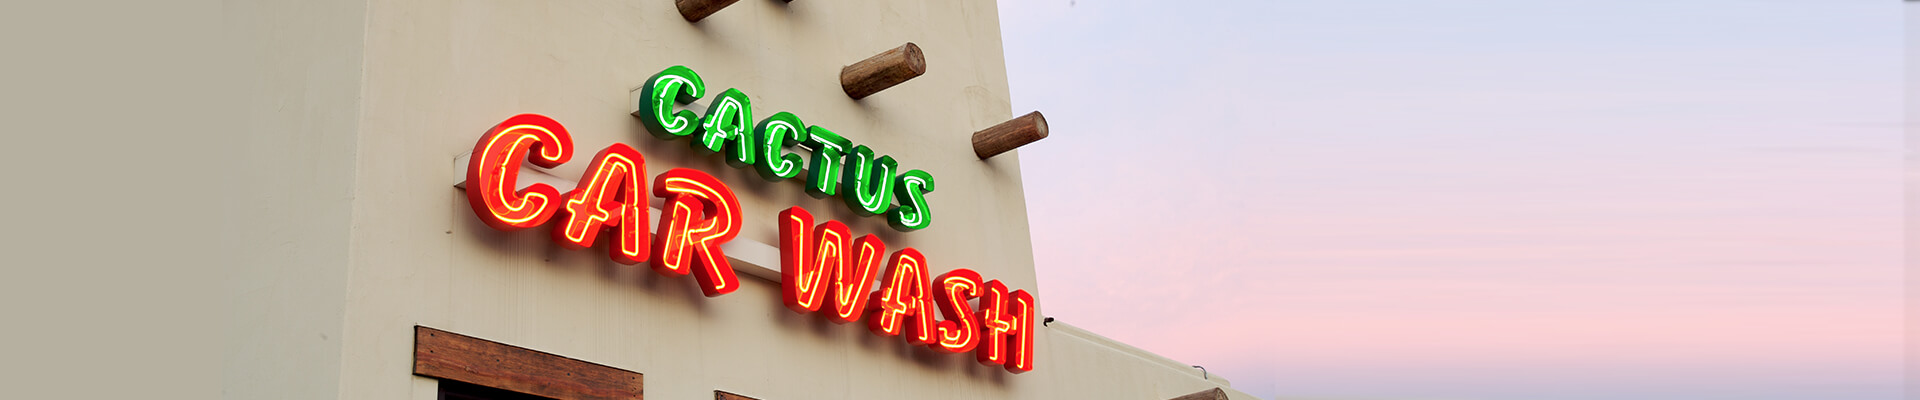 Cactus Car Wash Announces the Opening of a New Location in Kennesaw, GA!